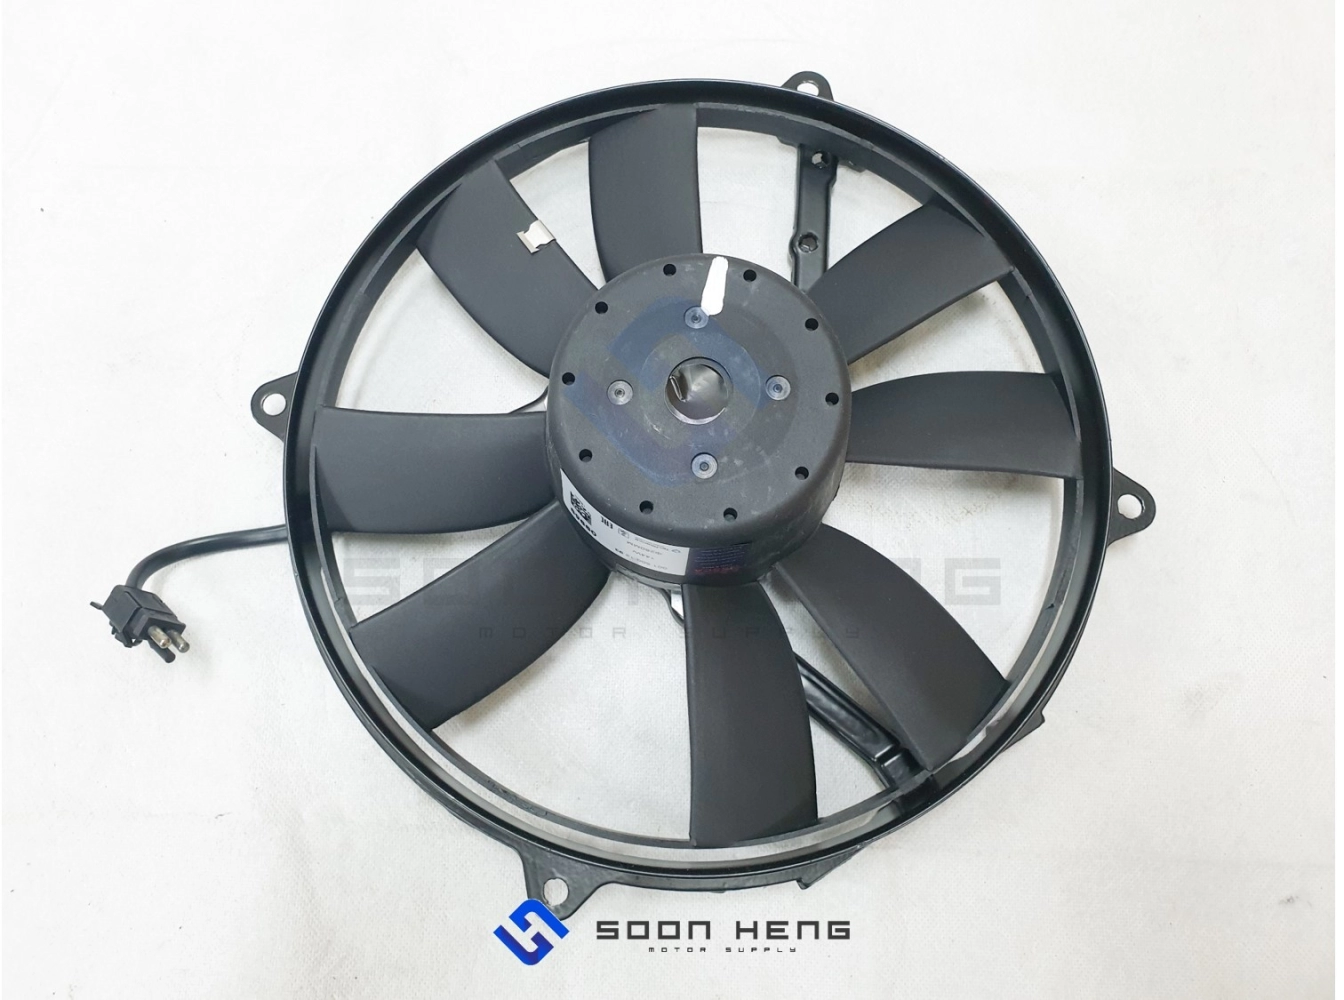 Mercedes-Benz W202, W210 and C208 - Radiator Fan (OSSCA)